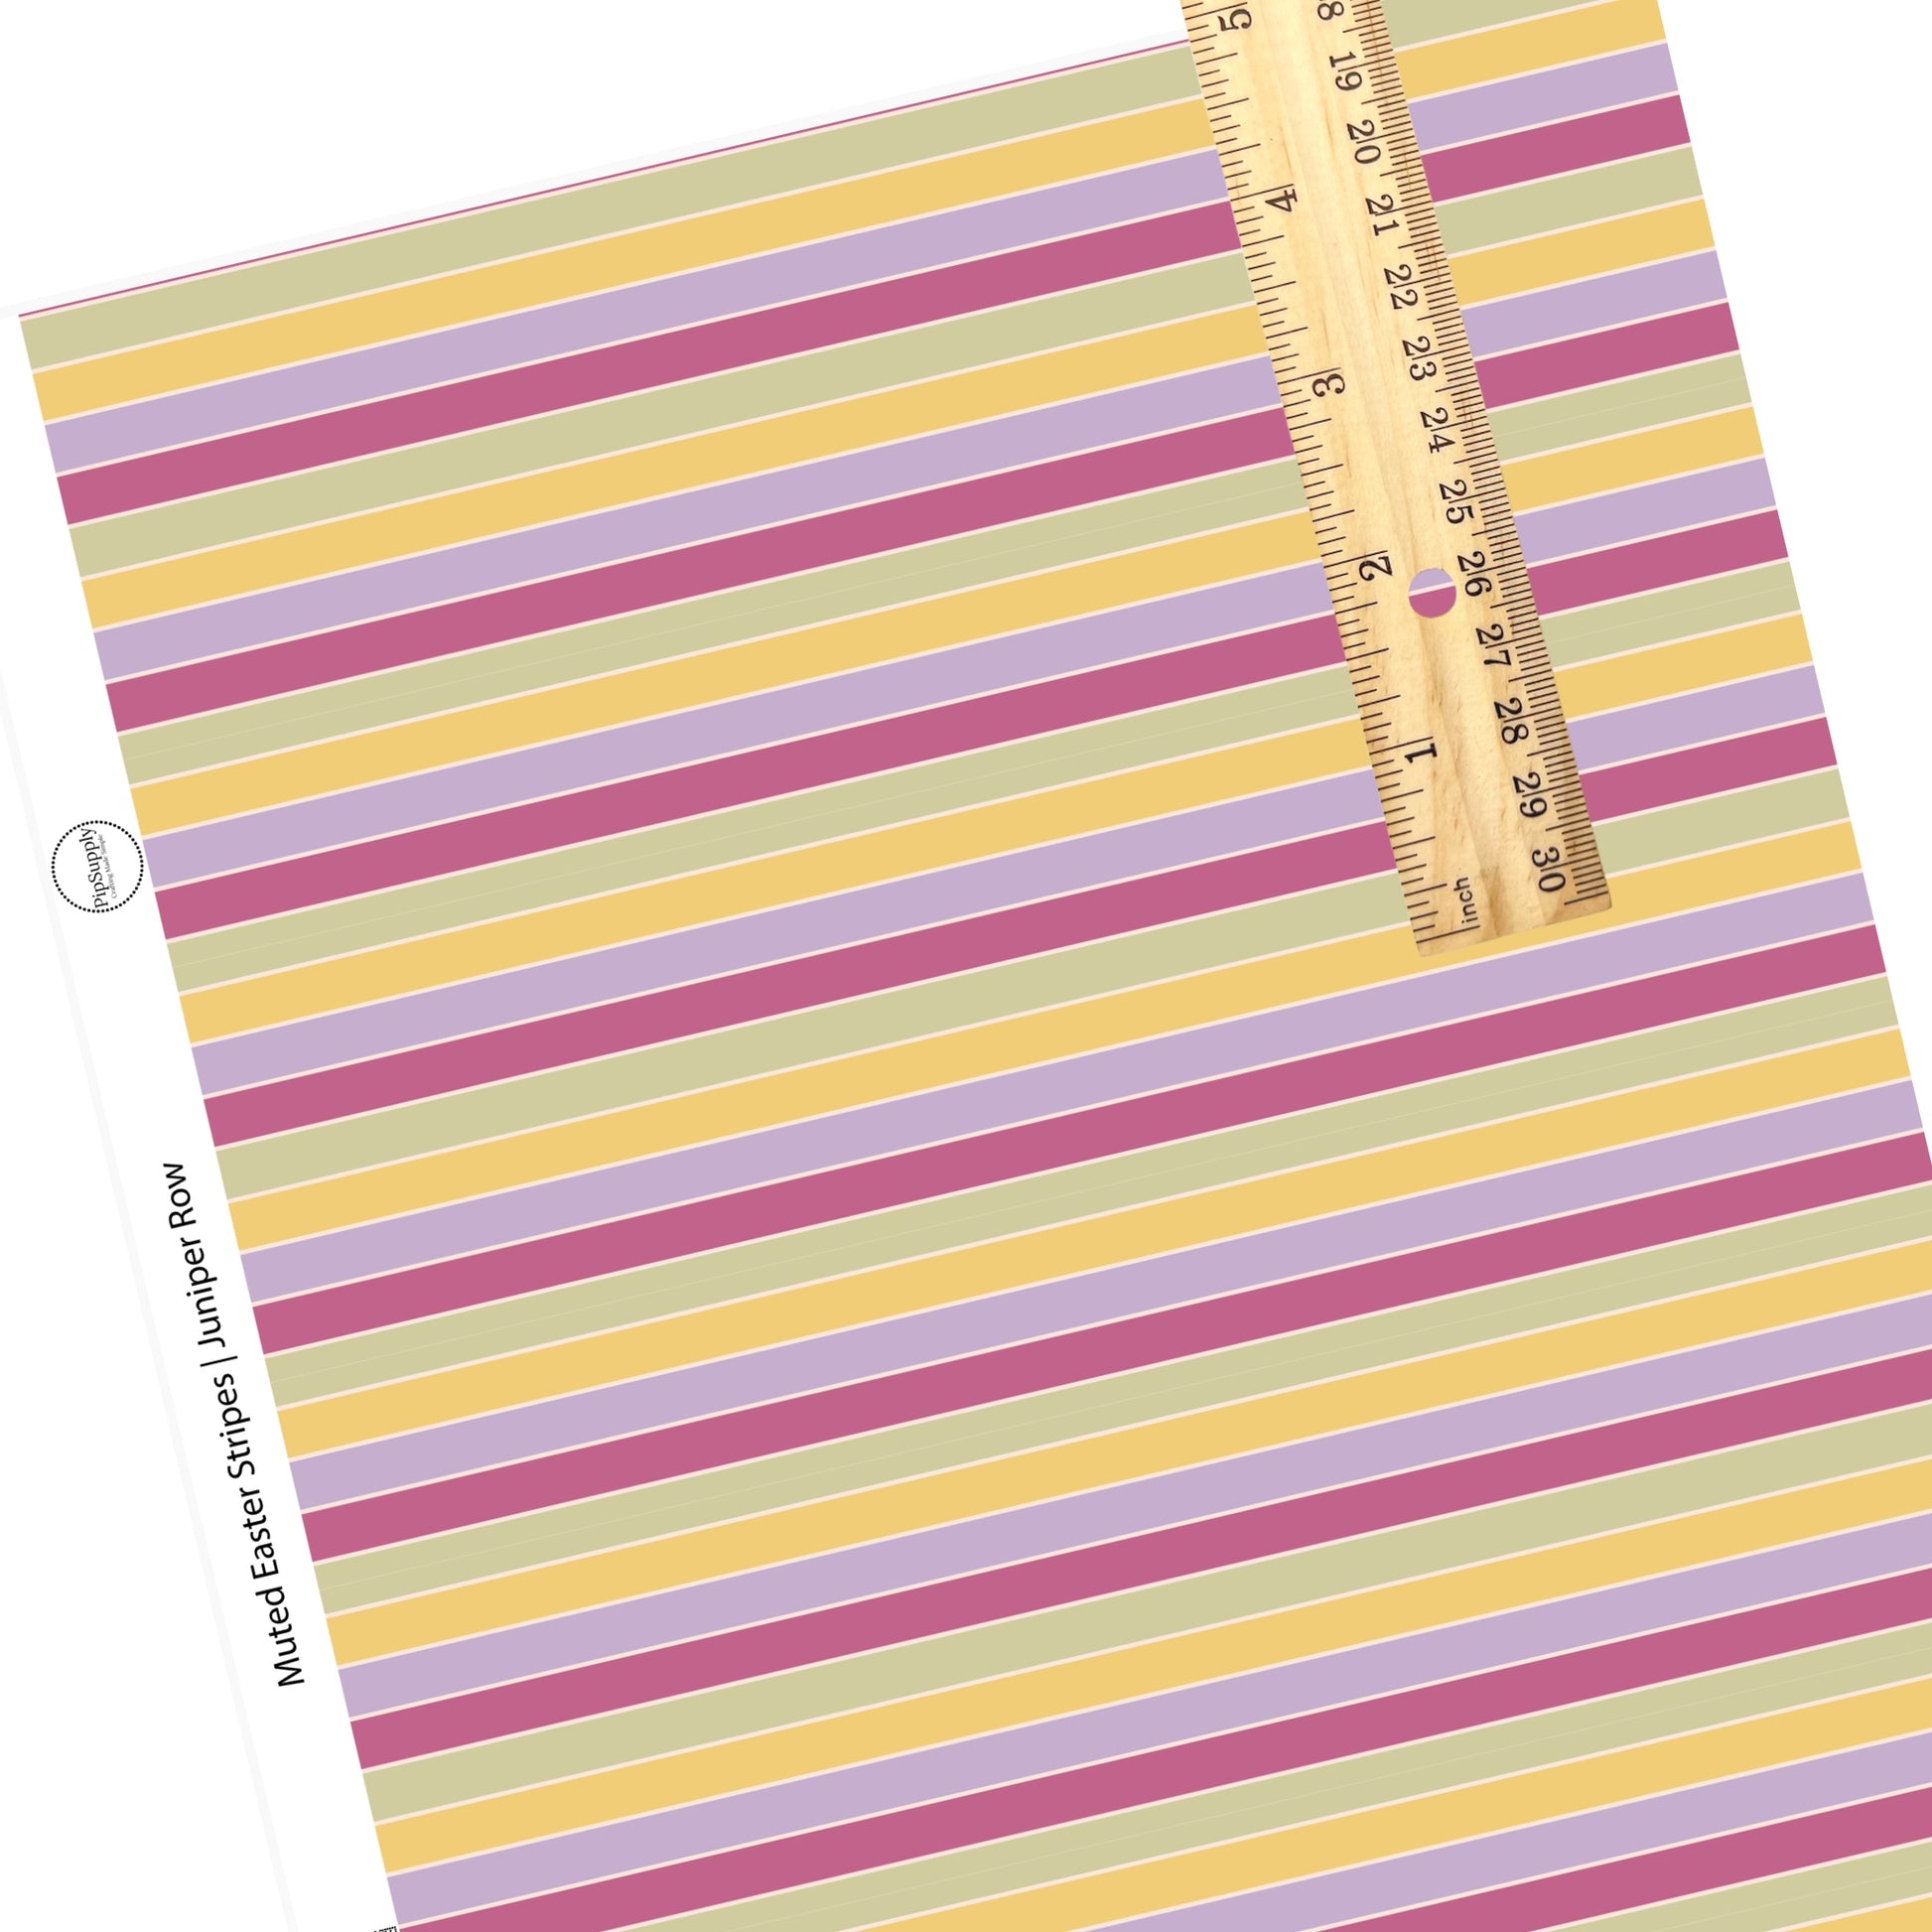 Sage, gold yellow, mauve, and lavender stripe faux leather sheet